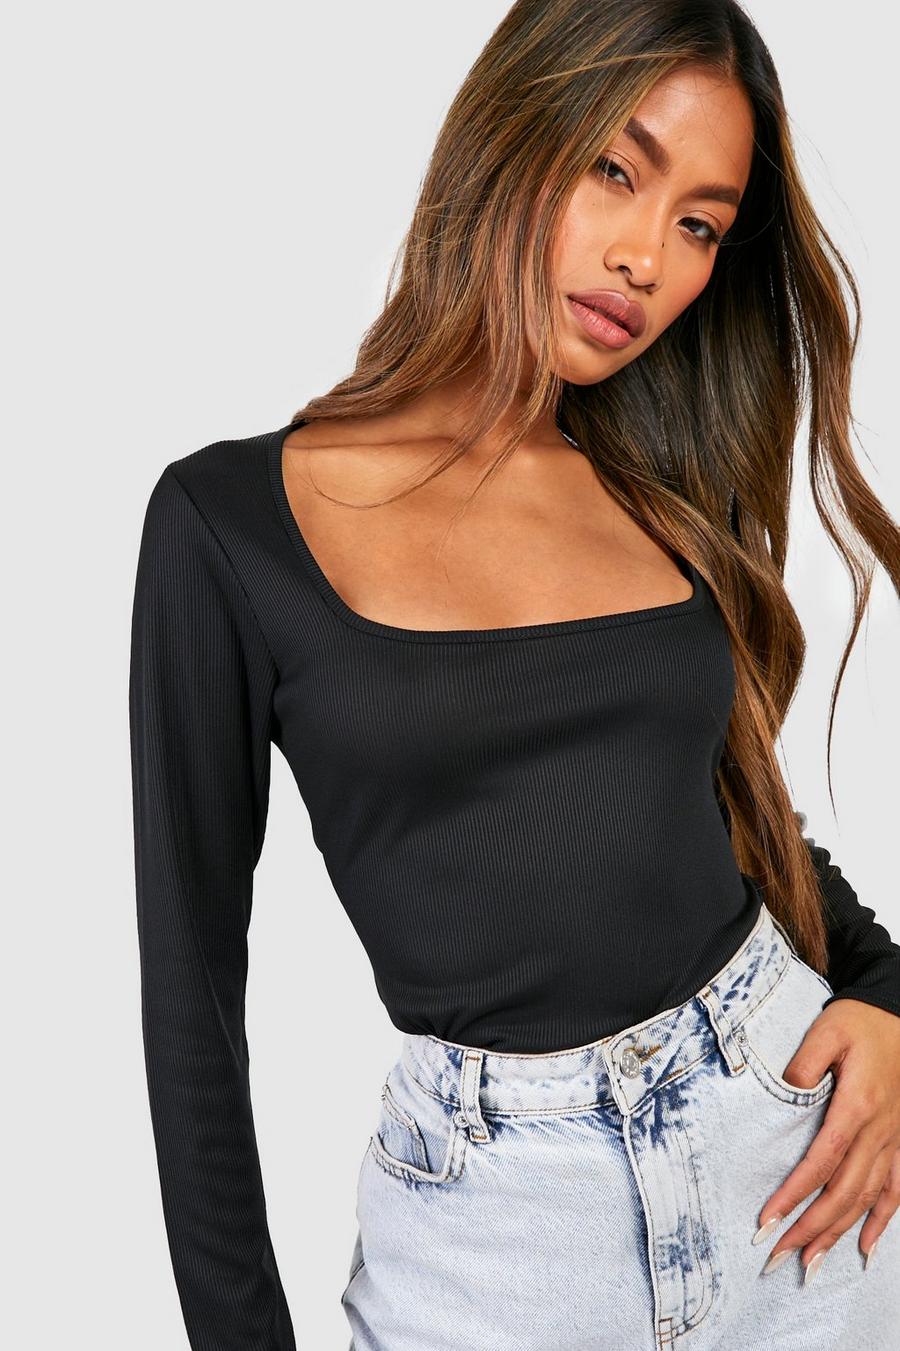 Wide Square Neck Black Rib Top, Street Style Store